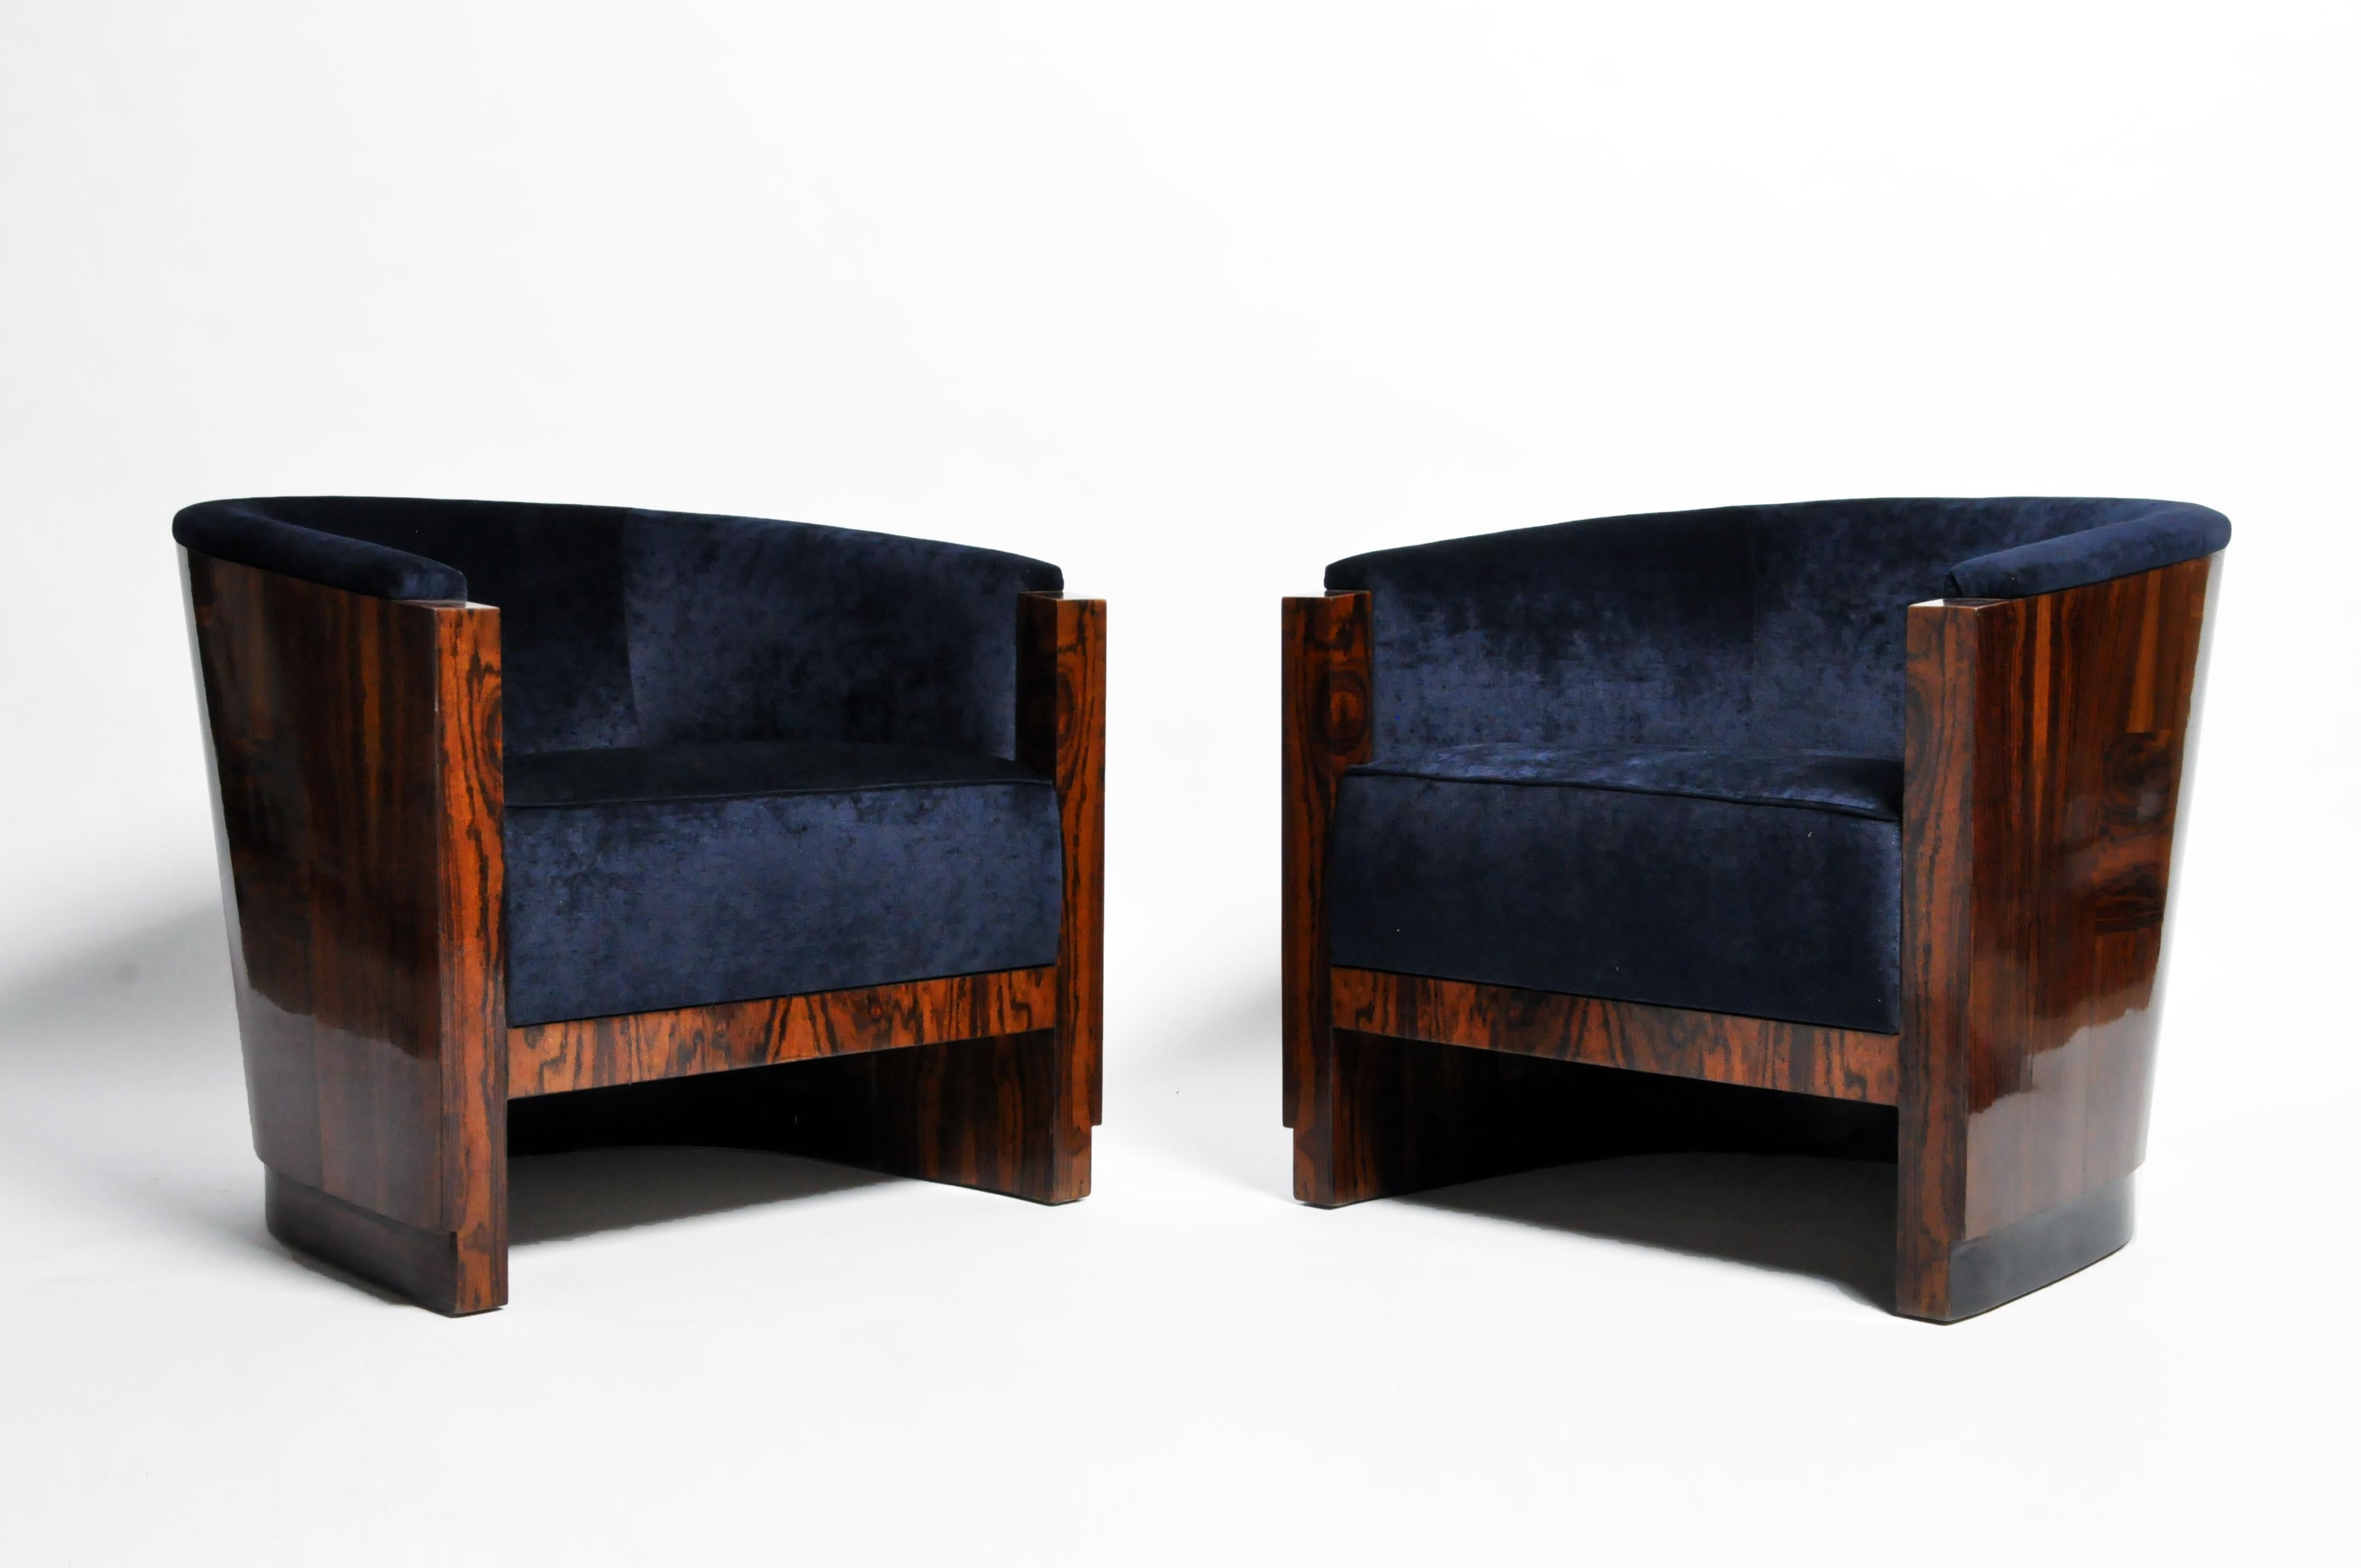 Pair of contemporary curved-back armchairs from Budapest, Hungary made from ziricote wood with new blue upholstery, circa 21st century. Price is for the pair.